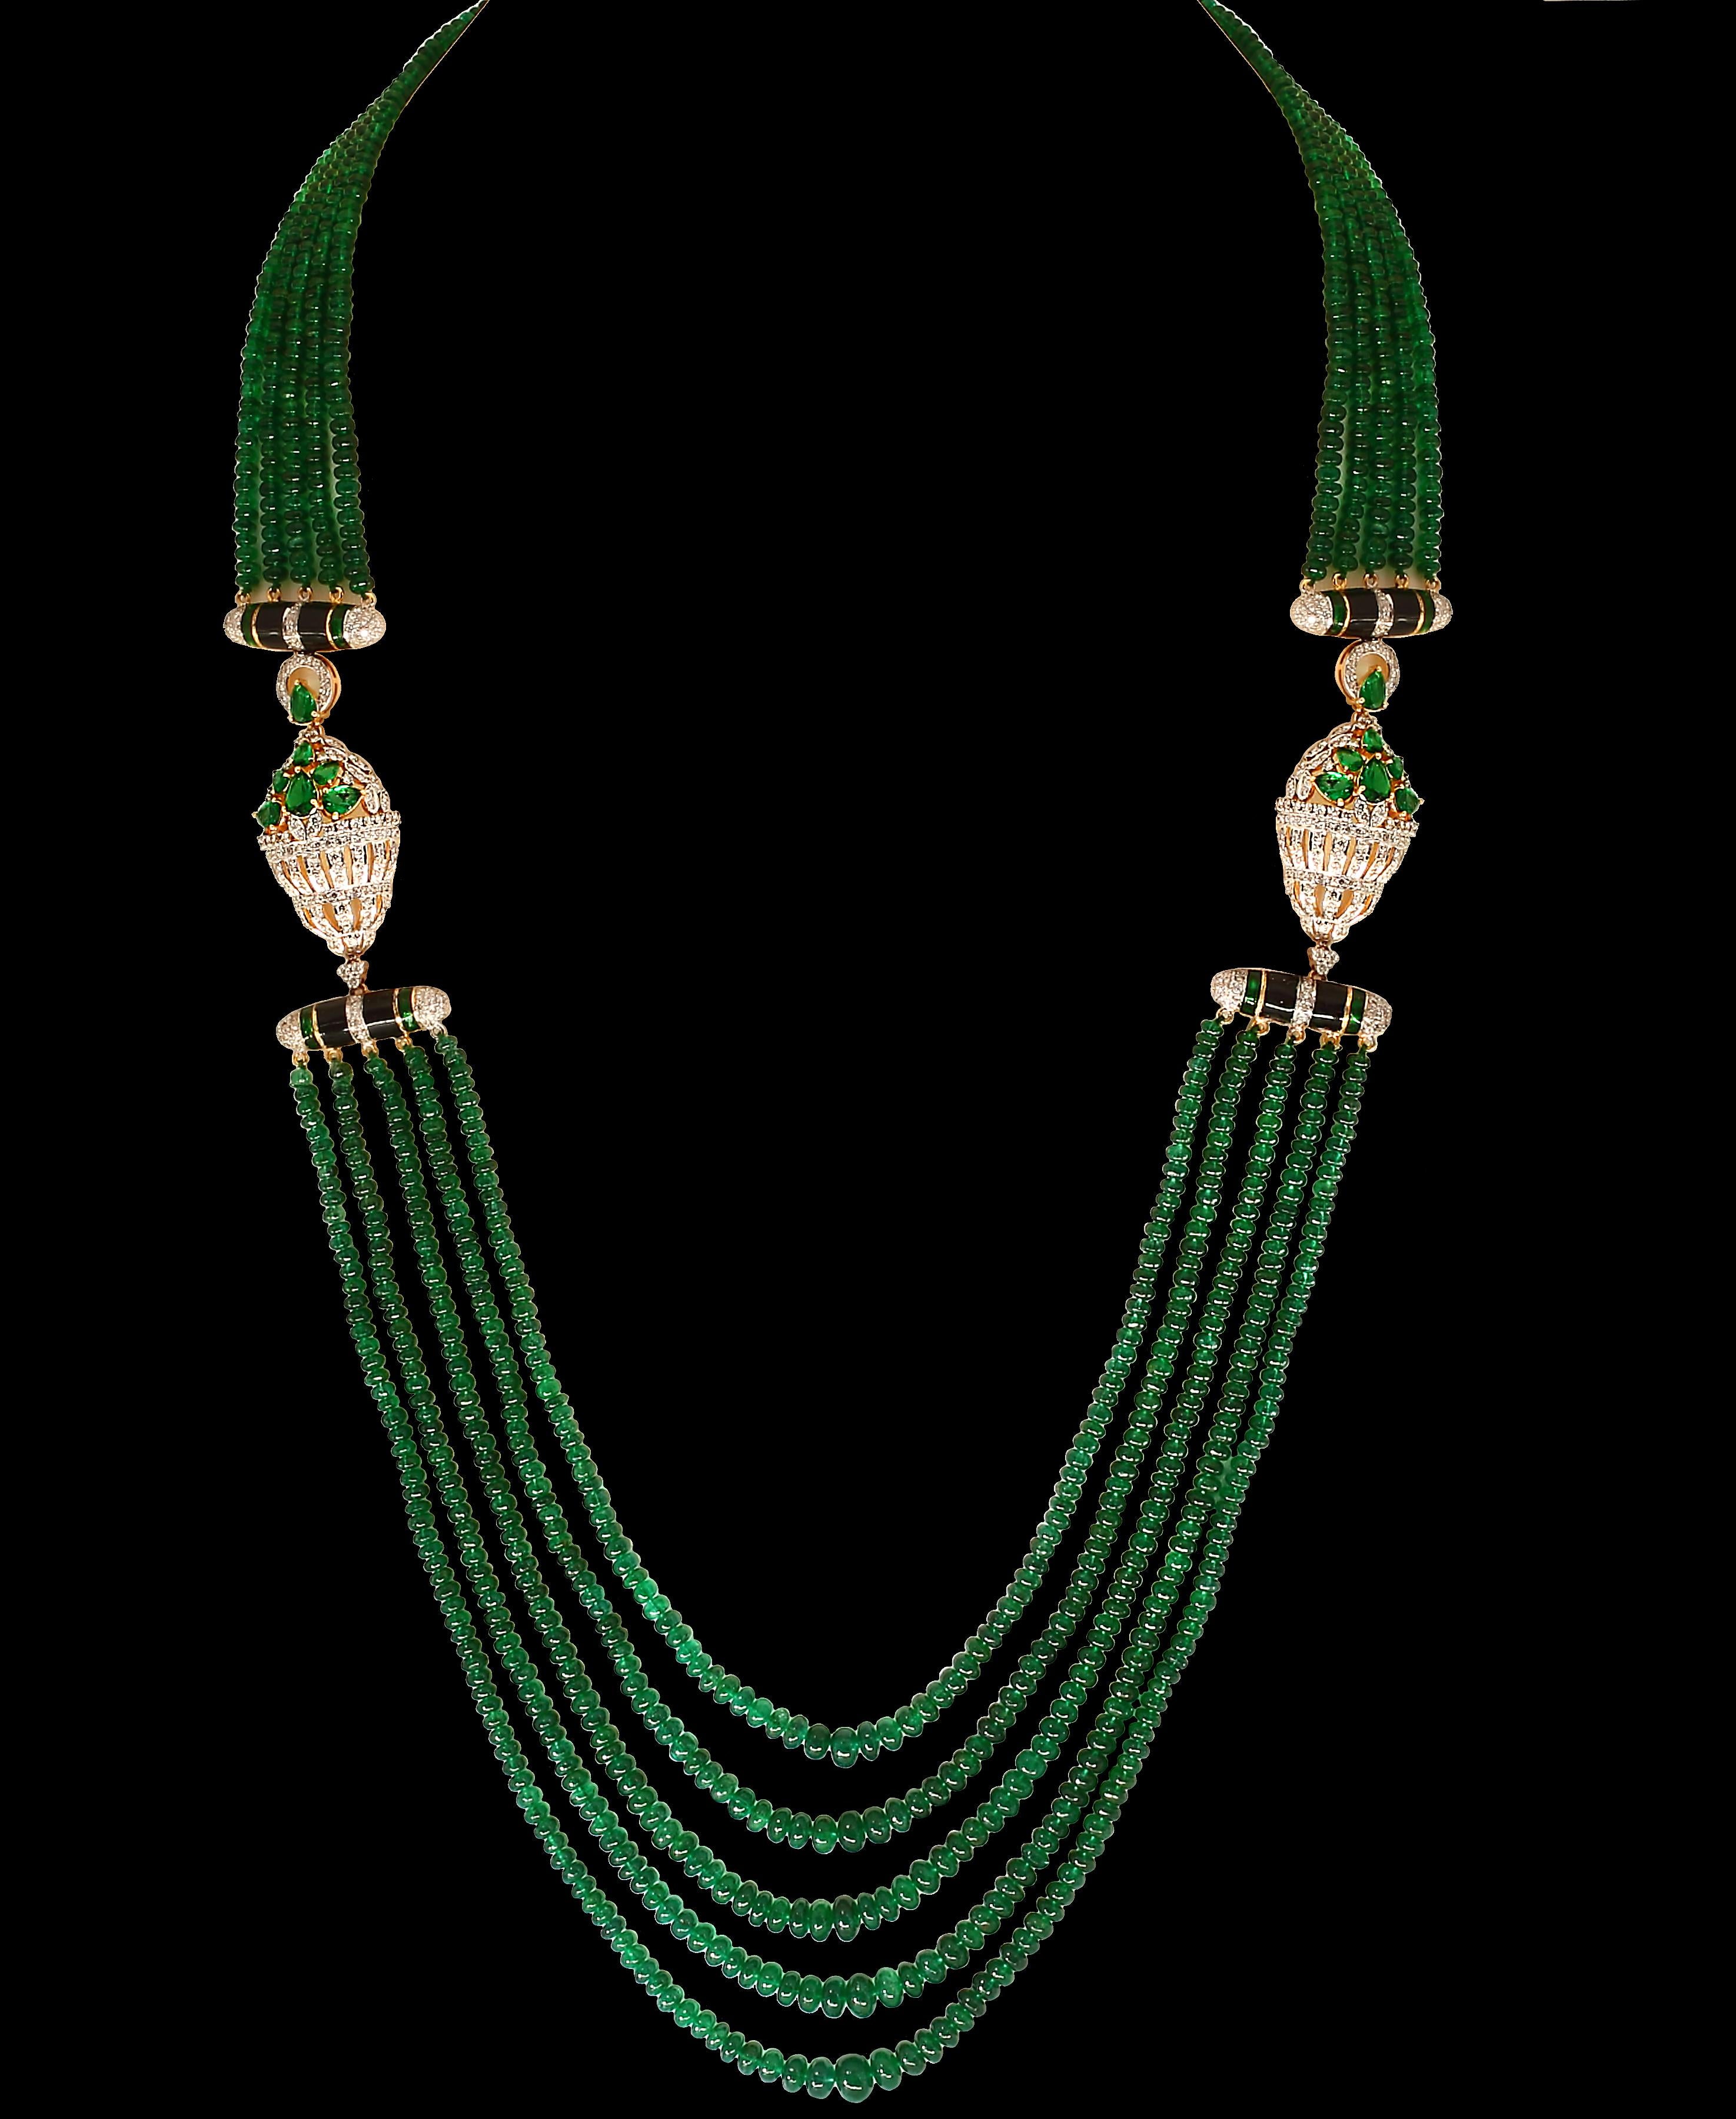 335 Carat 5-Strand Emerald Necklace with 6.5 Carat Diamond & Enamel in 14k Gold For Sale 5